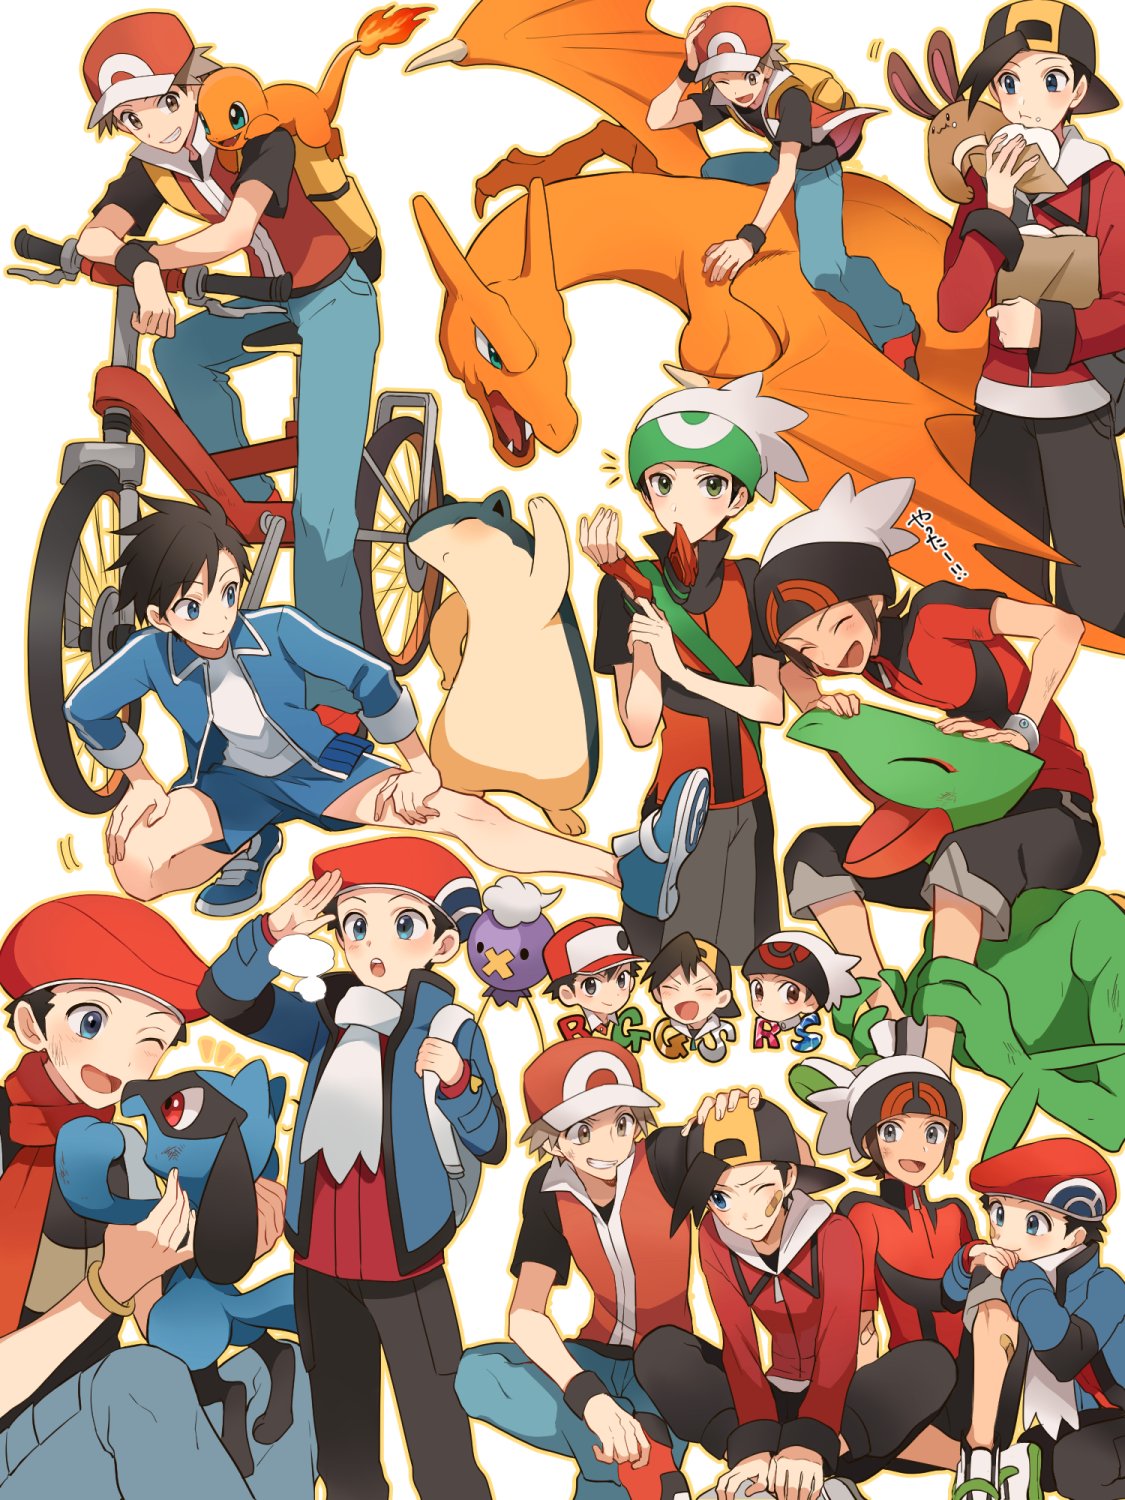 __red_ethan_charizard_brendan_charmander_and_6_more_pokemon_and_10_more_drawn_by_yukin_es__b6d41d40fb5fd70d35f03d65dcfc5213.jpg